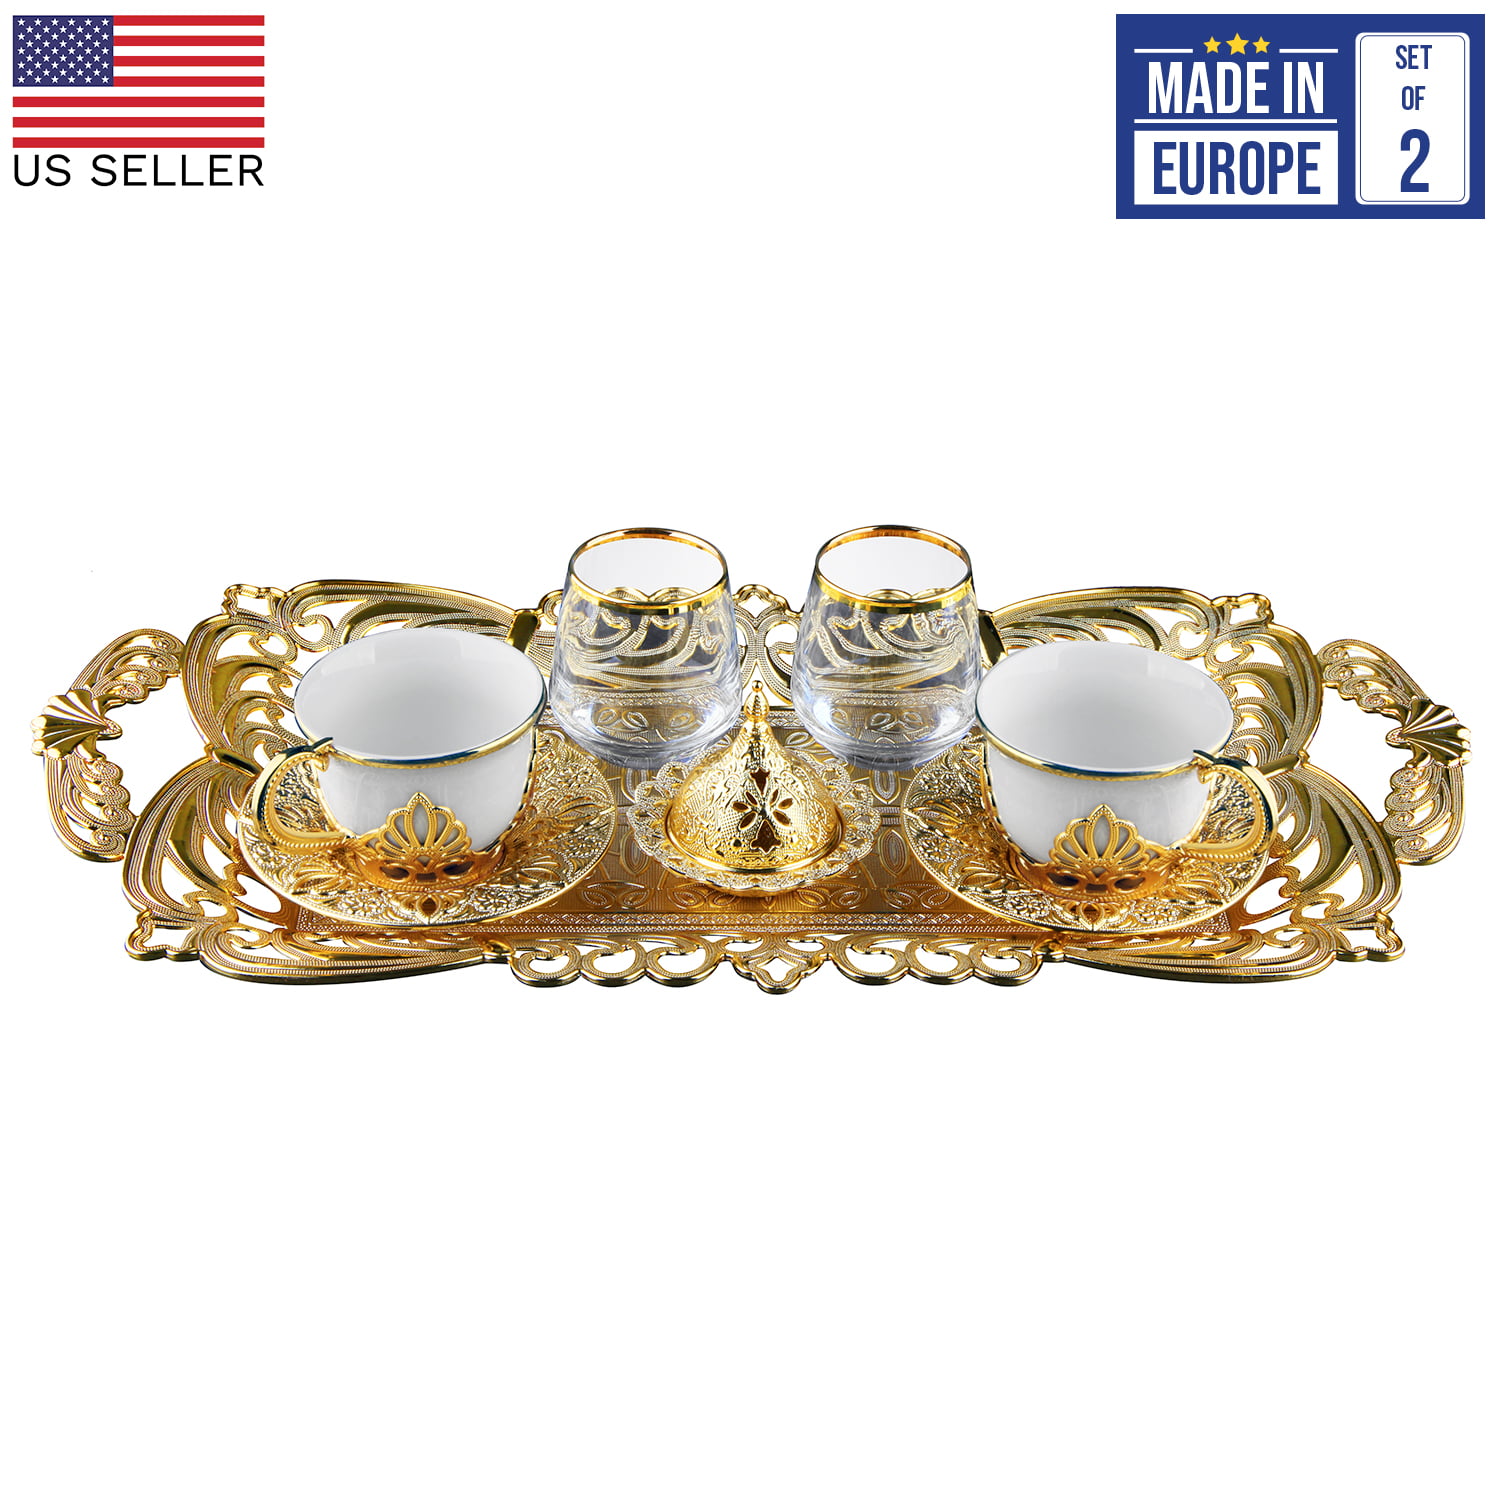 Coffee Cup Set of 6 | Luxurious 18-Piece Handcrafted Porcelain Cups with  Metal Saucers and Removable Cup Holders | Turkish Coffee Cup Set | Juego de